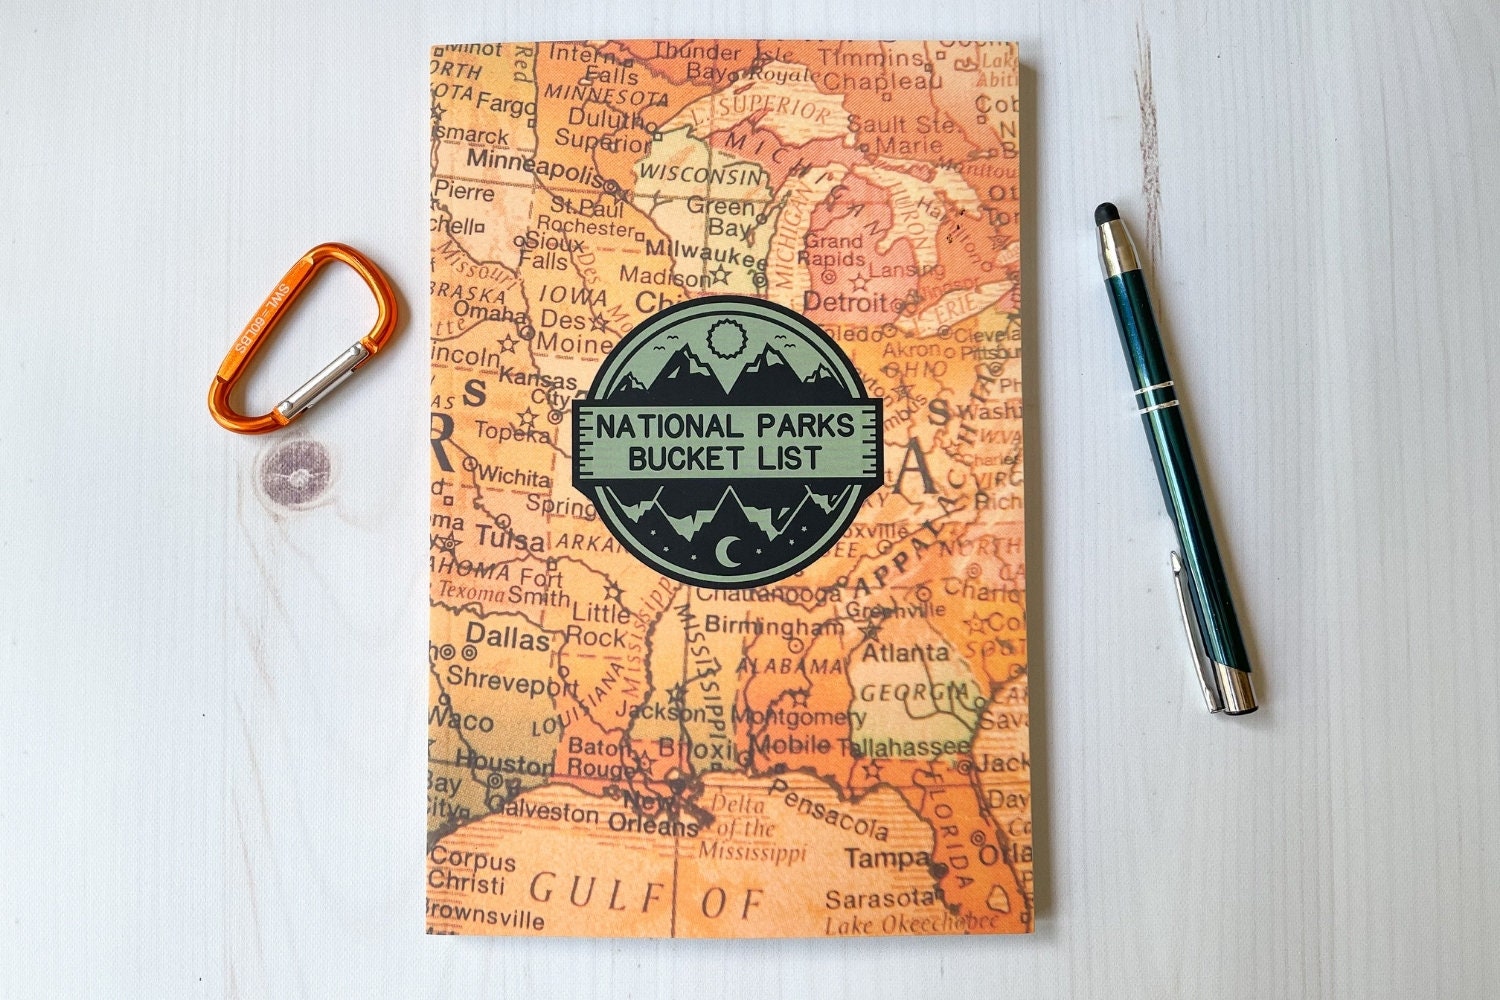 travel memory book: Record your travel memories and emotions using guided  prompts in this 8.5x11 travel keepsake diary designed for both boys and